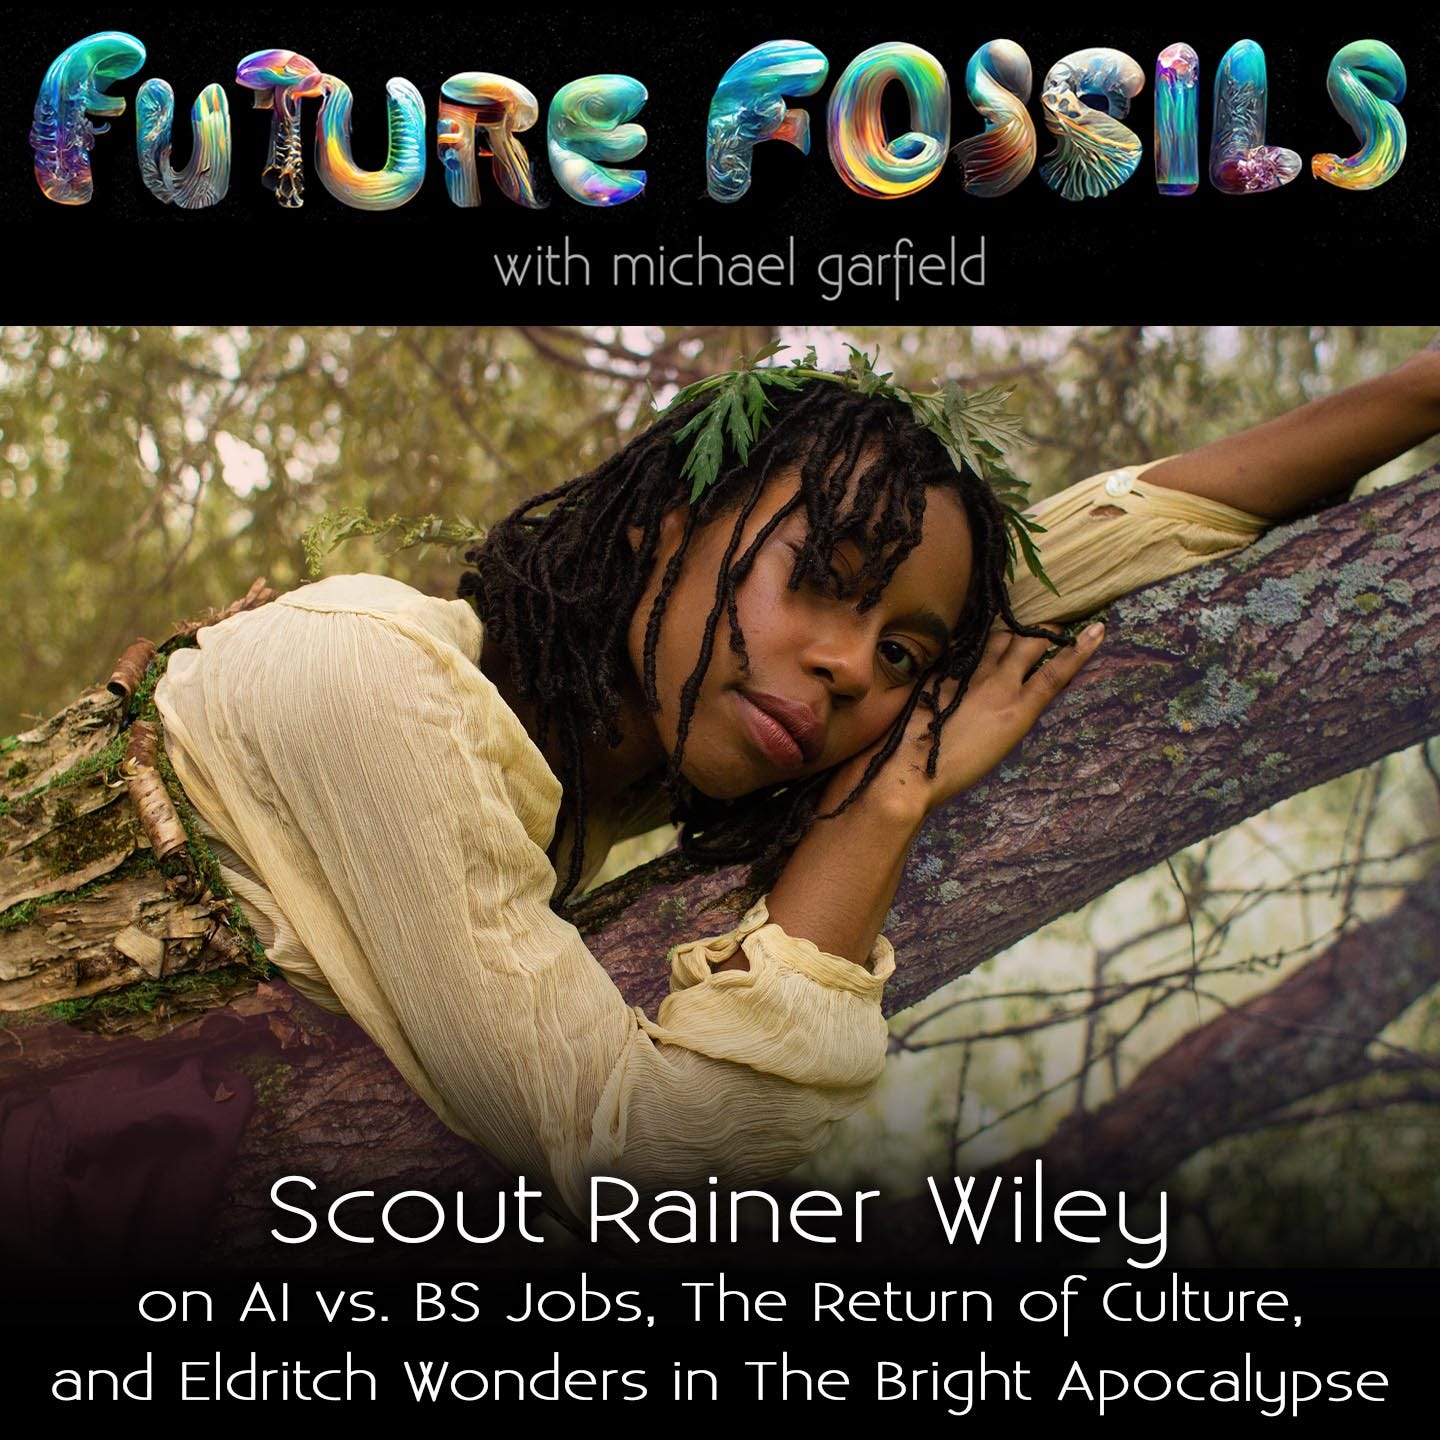 🤩🎻🤖 206 - Scout Rainer Wiley on AI vs. BS Jobs, The Return of Culture, and Eldritch Wonders in The Bright Apocalypse